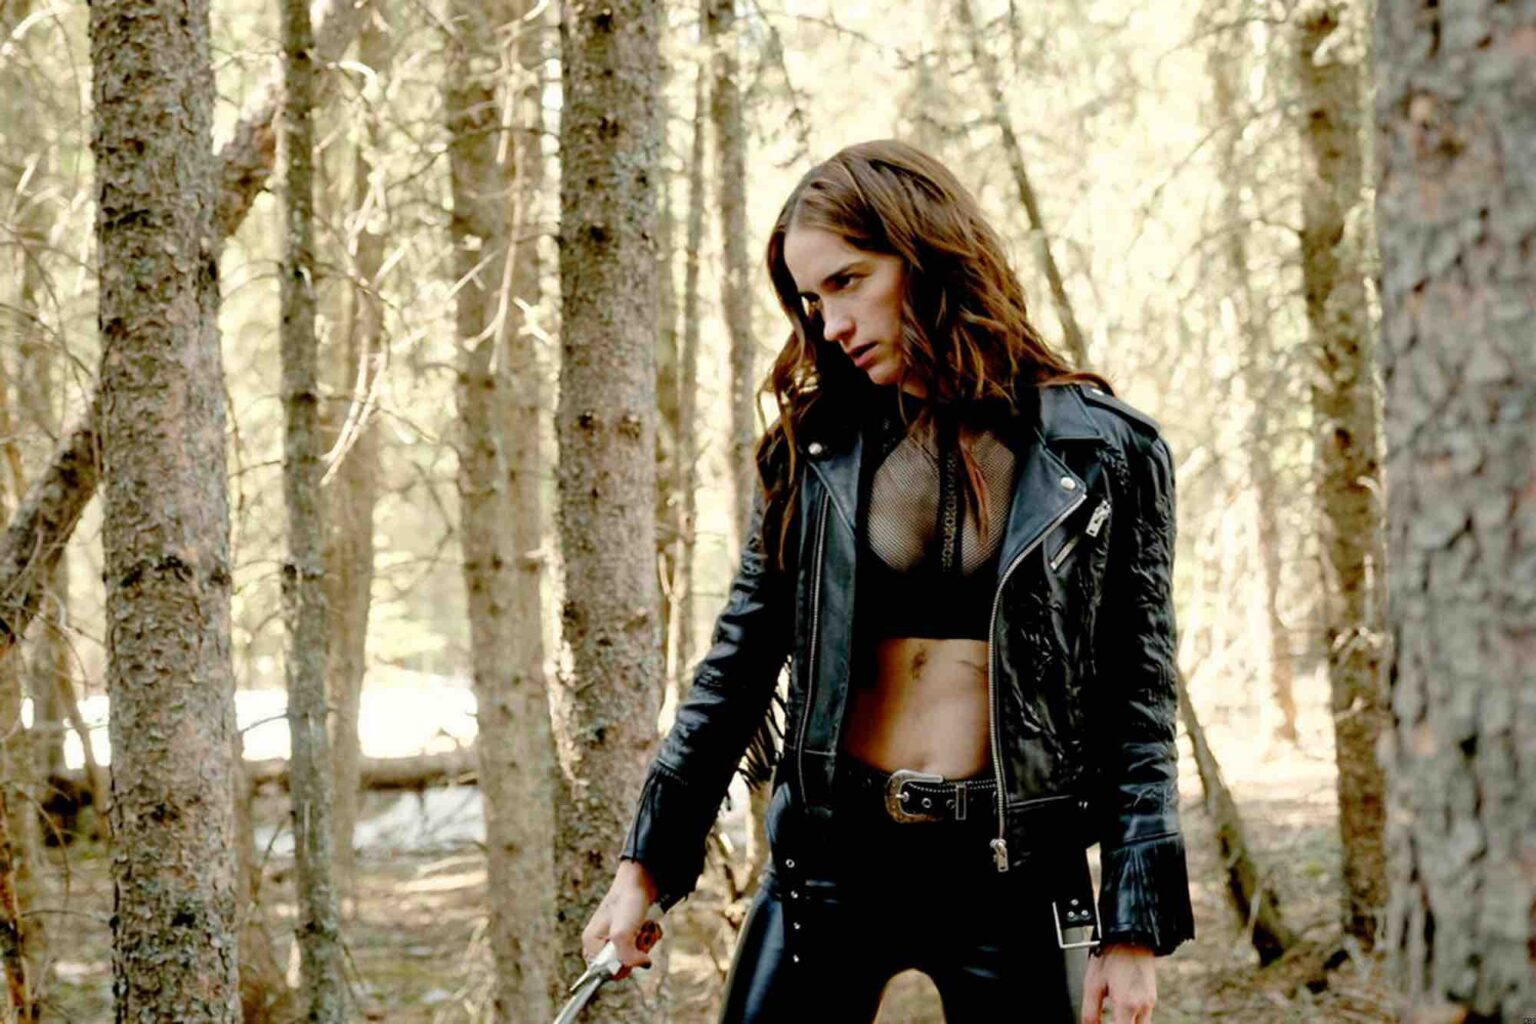 Earpers have taken to Twitter to try and save 'Wynonna Earp' past season 4. Read tweets from fans trying to save the series.